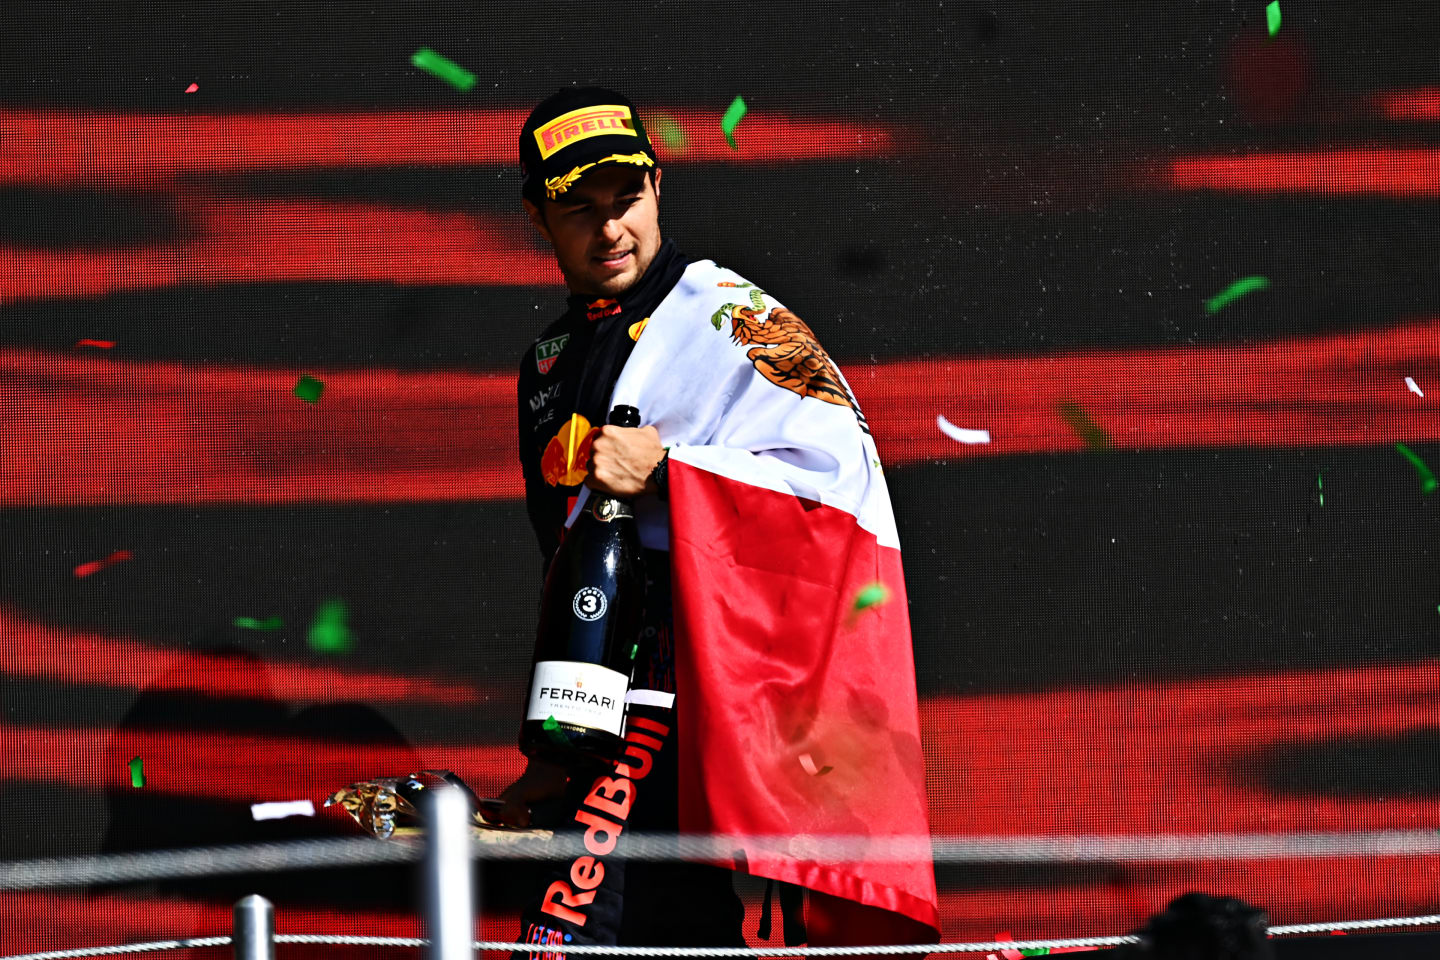 MEXICO CITY, MEXICO - NOVEMBER 07: Third placed Sergio Perez of Mexico and Red Bull Racing celebrates on the podium during the F1 Grand Prix of Mexico at Autodromo Hermanos Rodriguez on November 07, 2021 in Mexico City, Mexico. (Photo by Clive Mason/Getty Images)